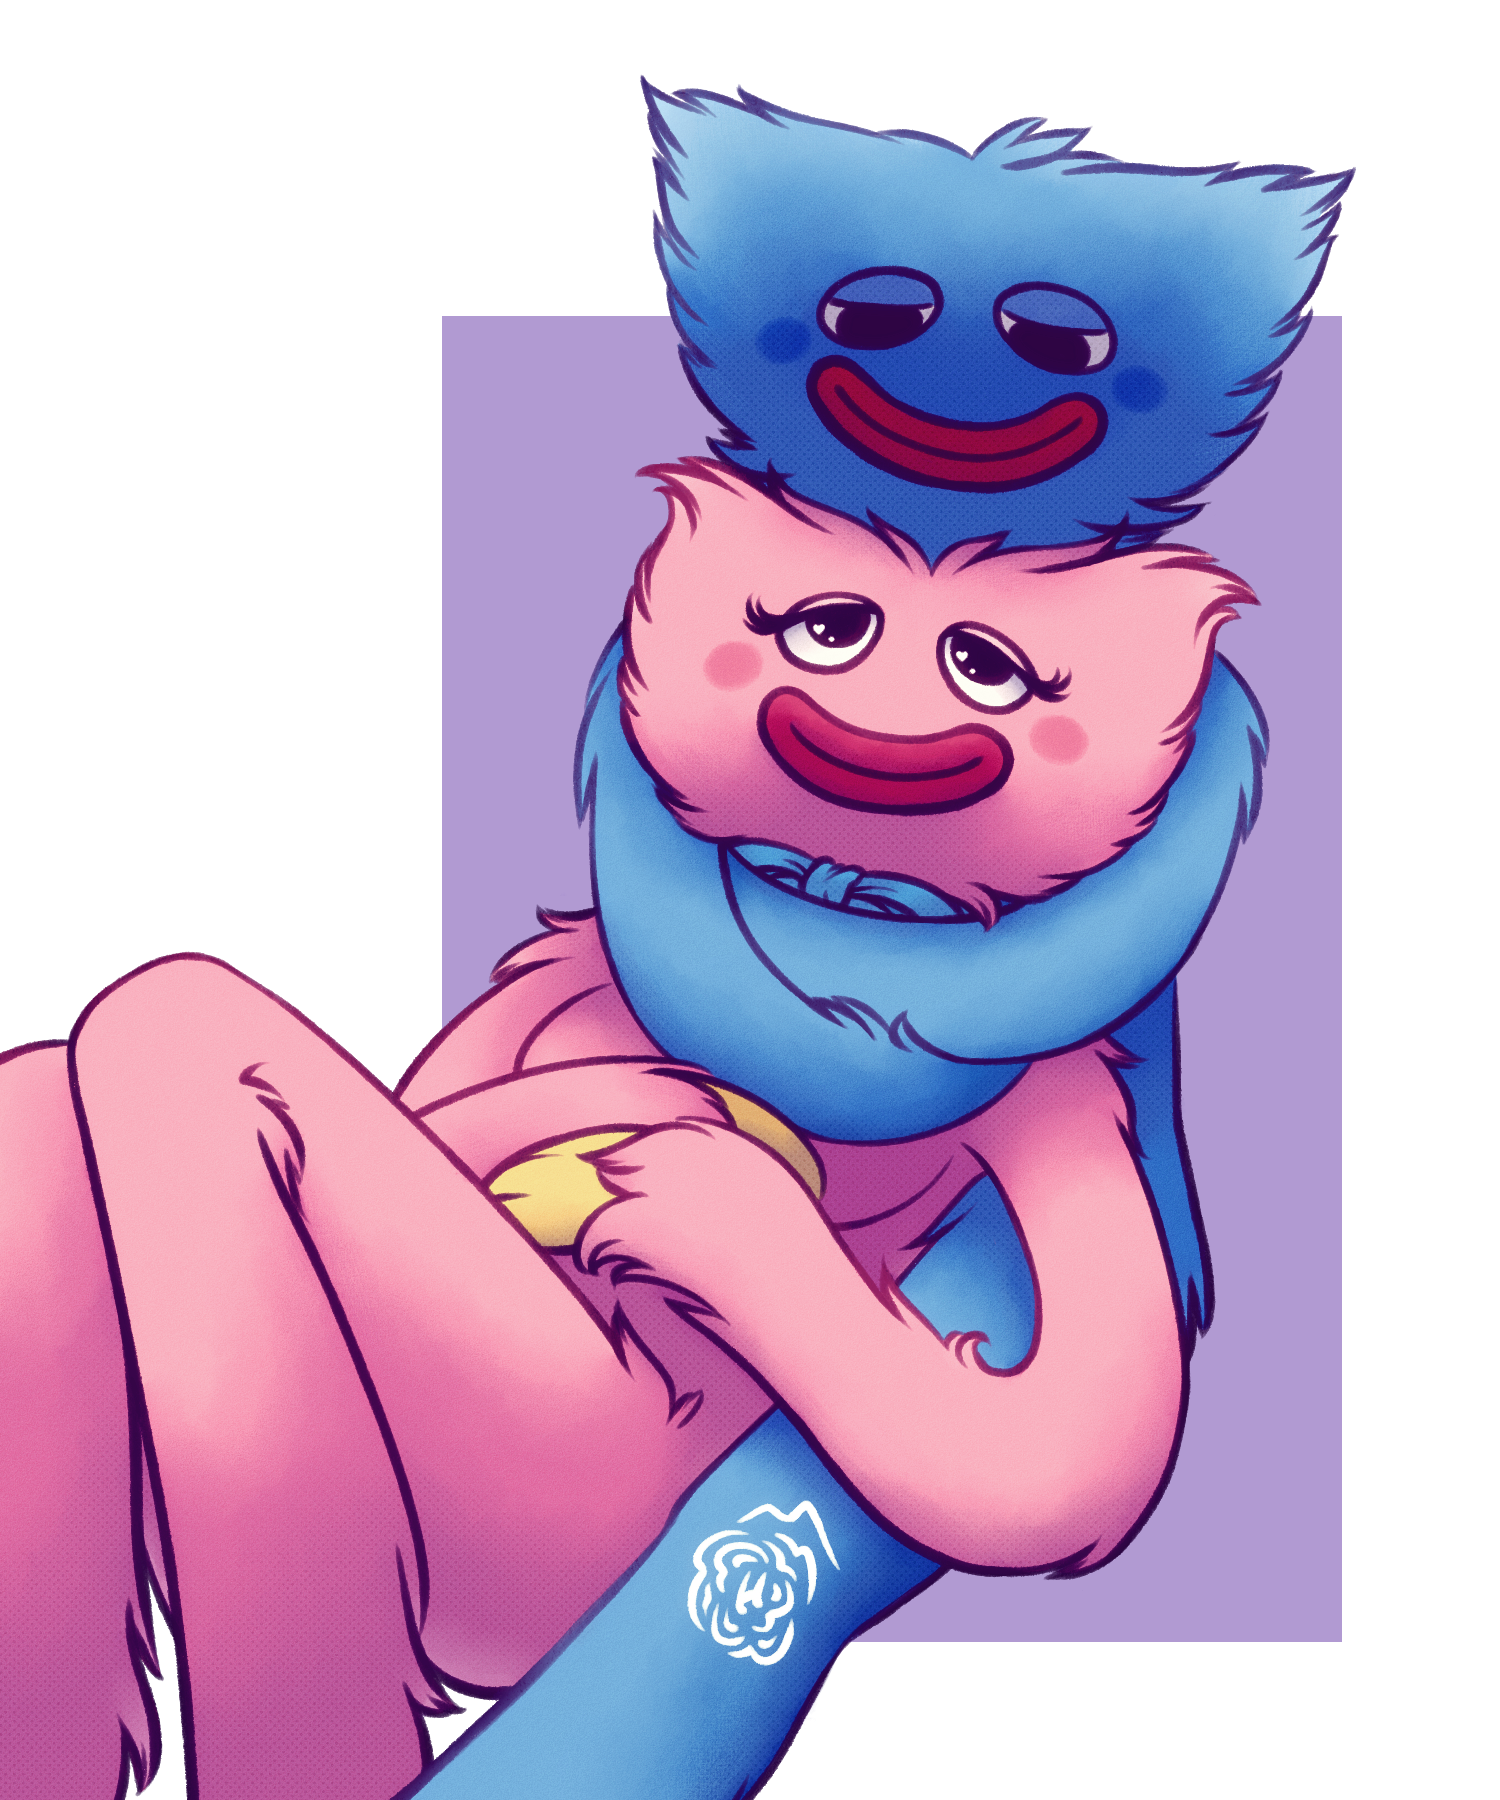 Poppy Playtime: Huggy Wuggy And Poppy by heartsriannabendy on DeviantArt